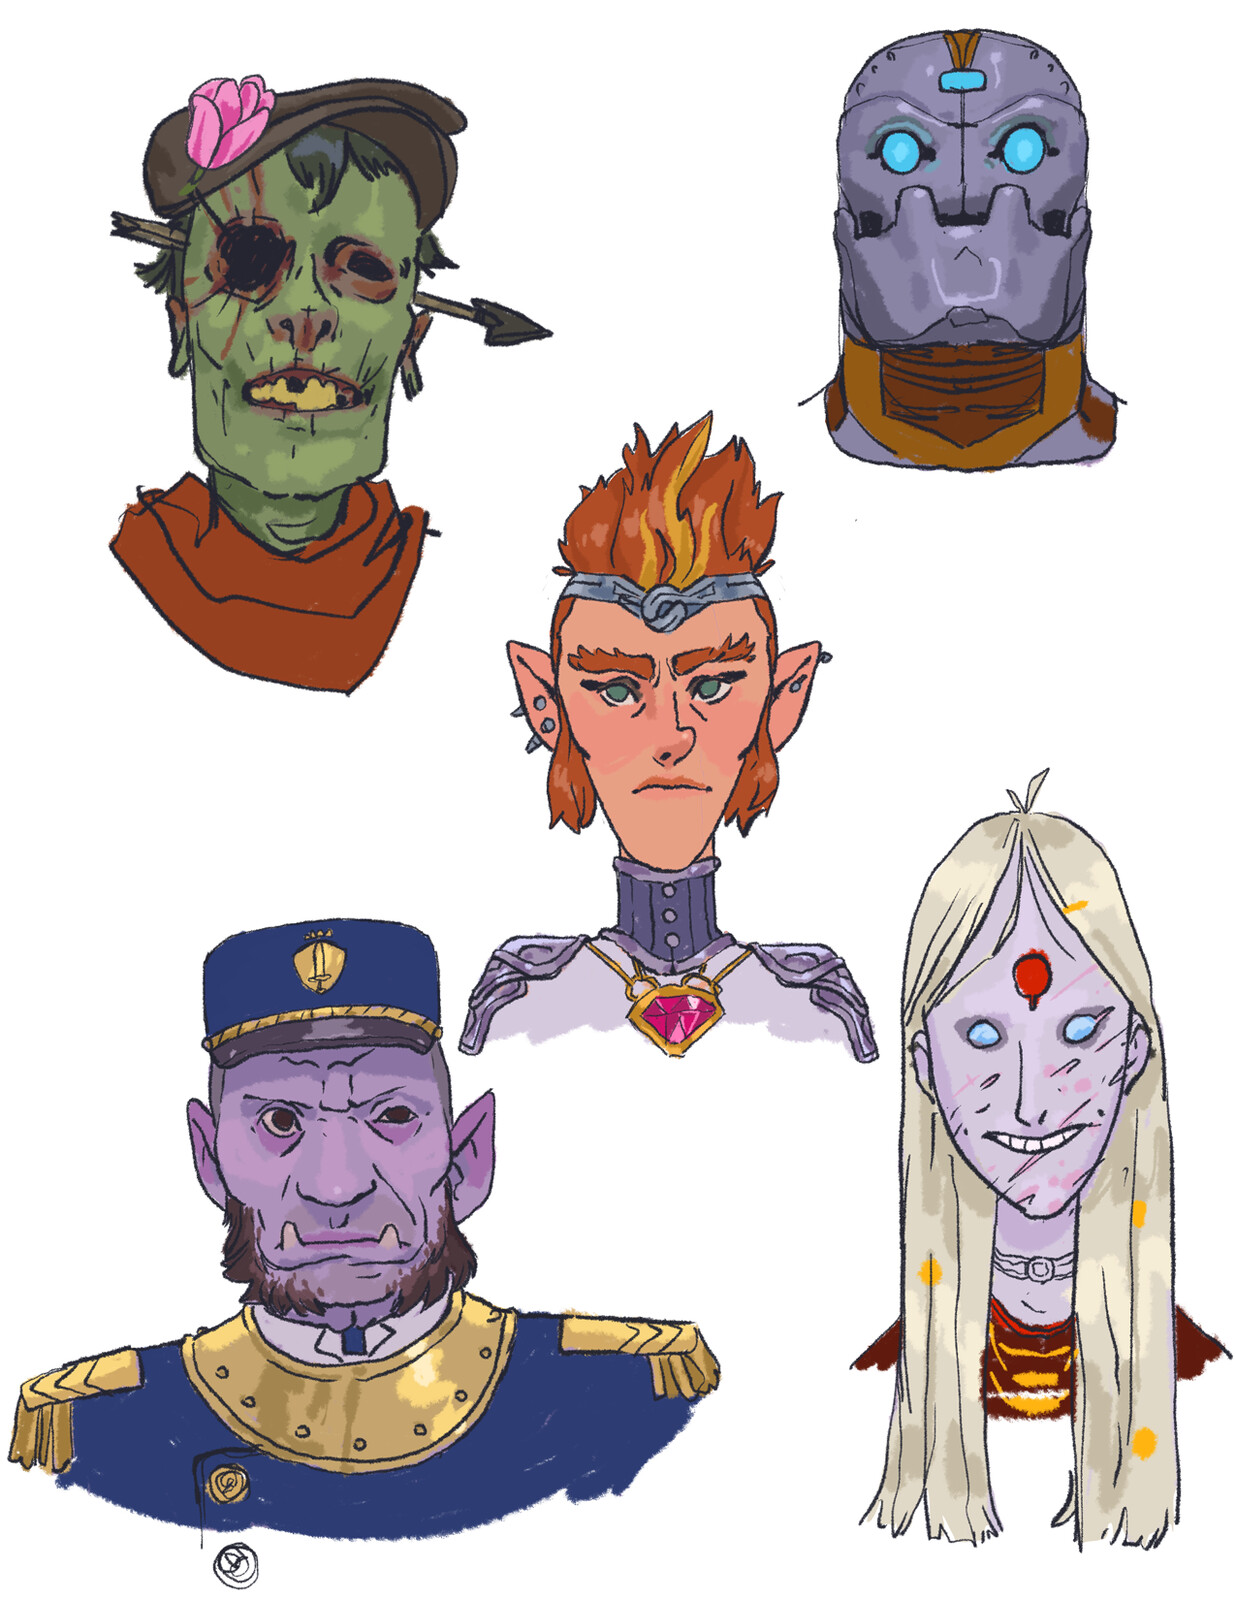 Portraits of NPCs and enemies the players could encounter in the adventure